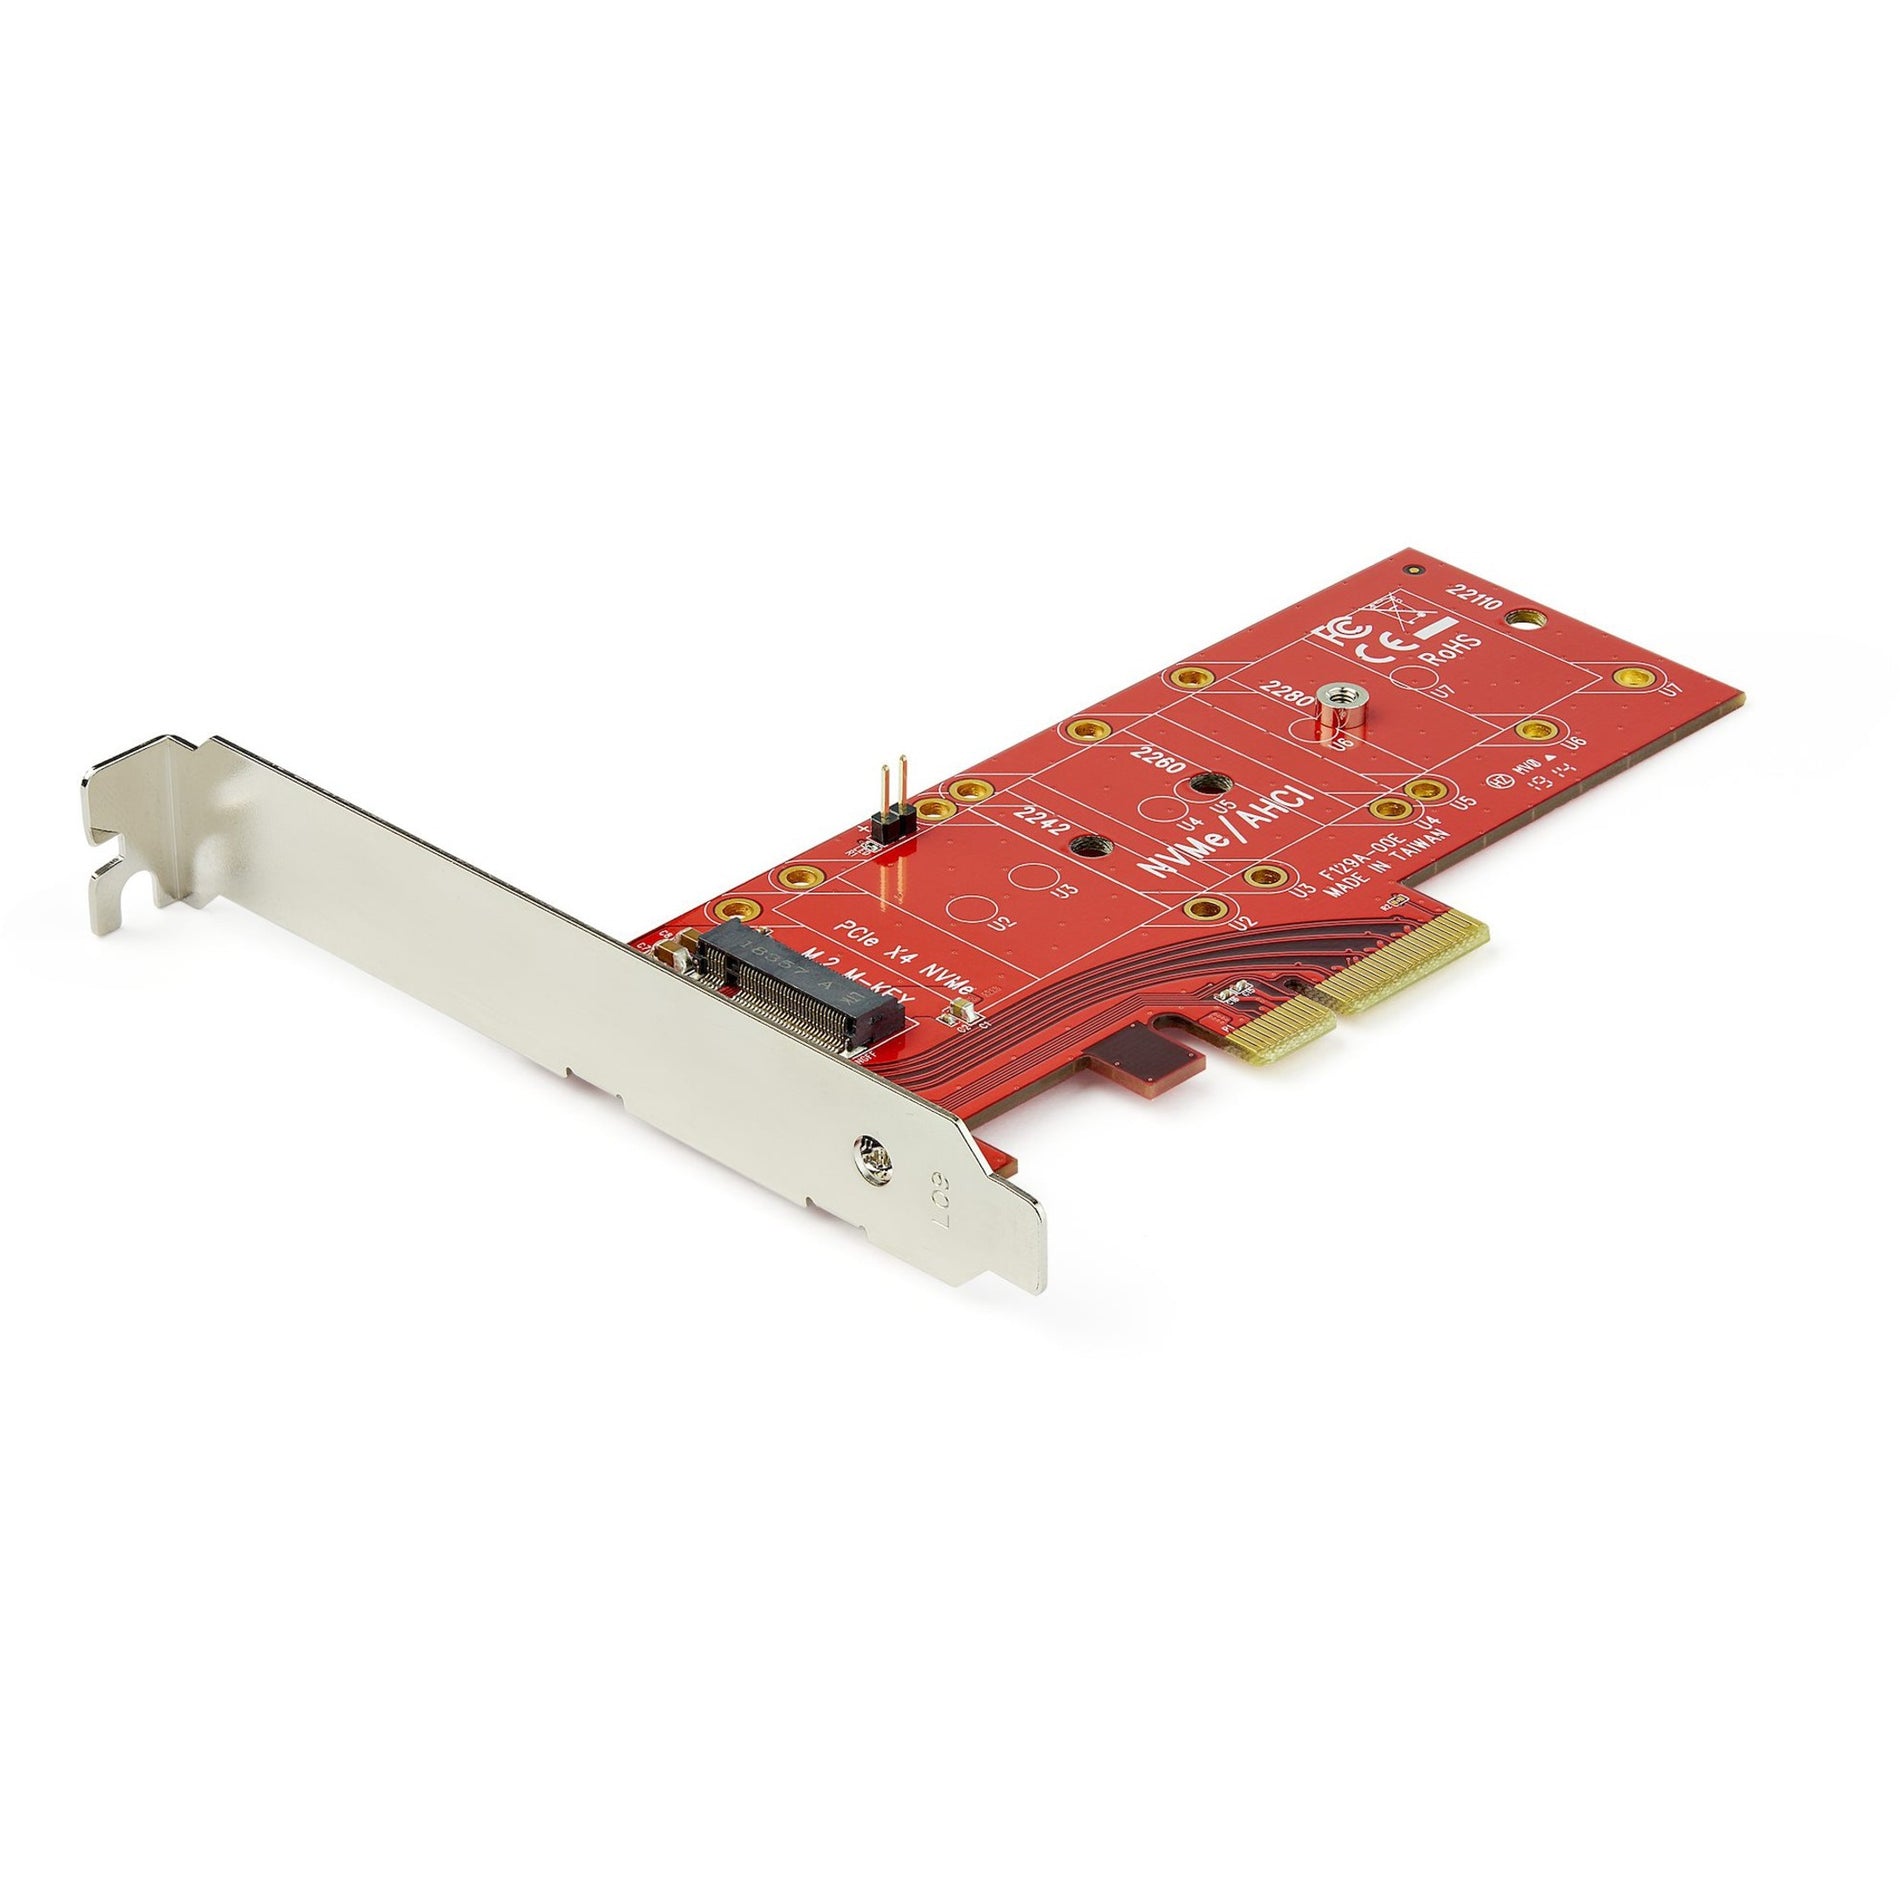 StarTech.com PEX4M2E1 x4 PCI Express to M.2 PCIe SSD Adapter - M.2 NVMe or ACHI Adapter Card, Easy SSD Installation